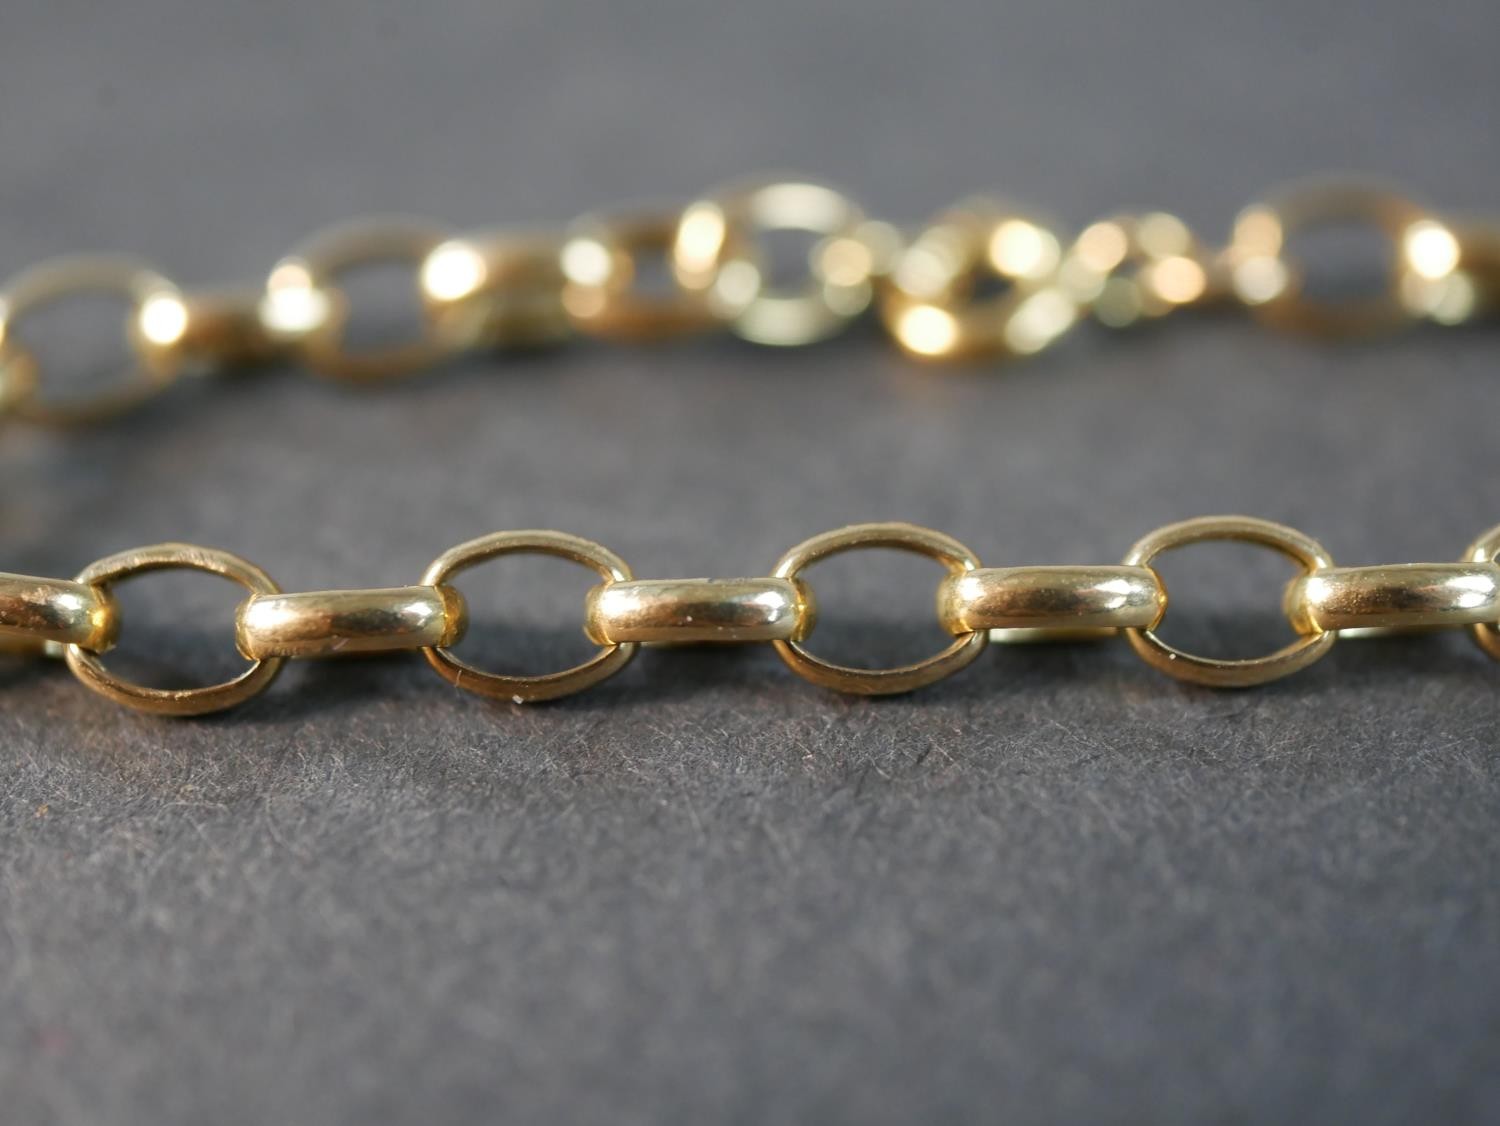 A 9ct yellow gold MUM ring along with a 9ct yellow gold oval link bracelet. Ring size 1/2. 4.23g - Image 6 of 13